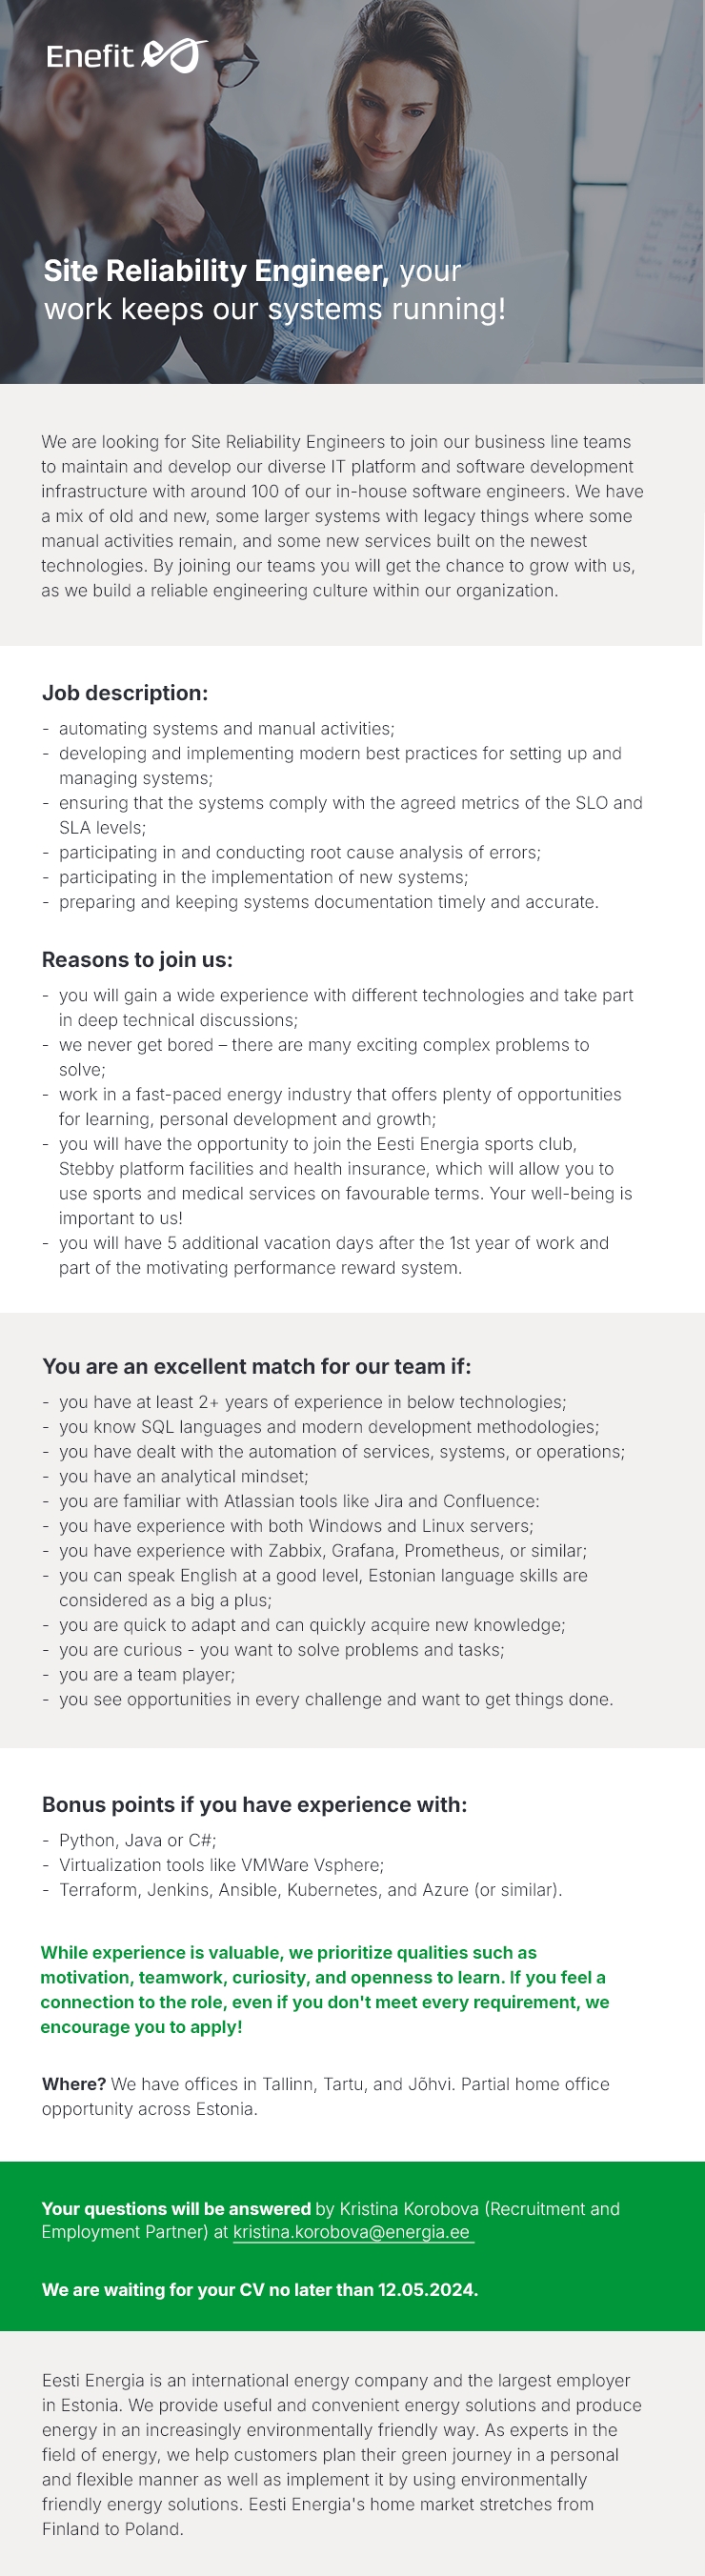 Enefit Site Reliability Engineer